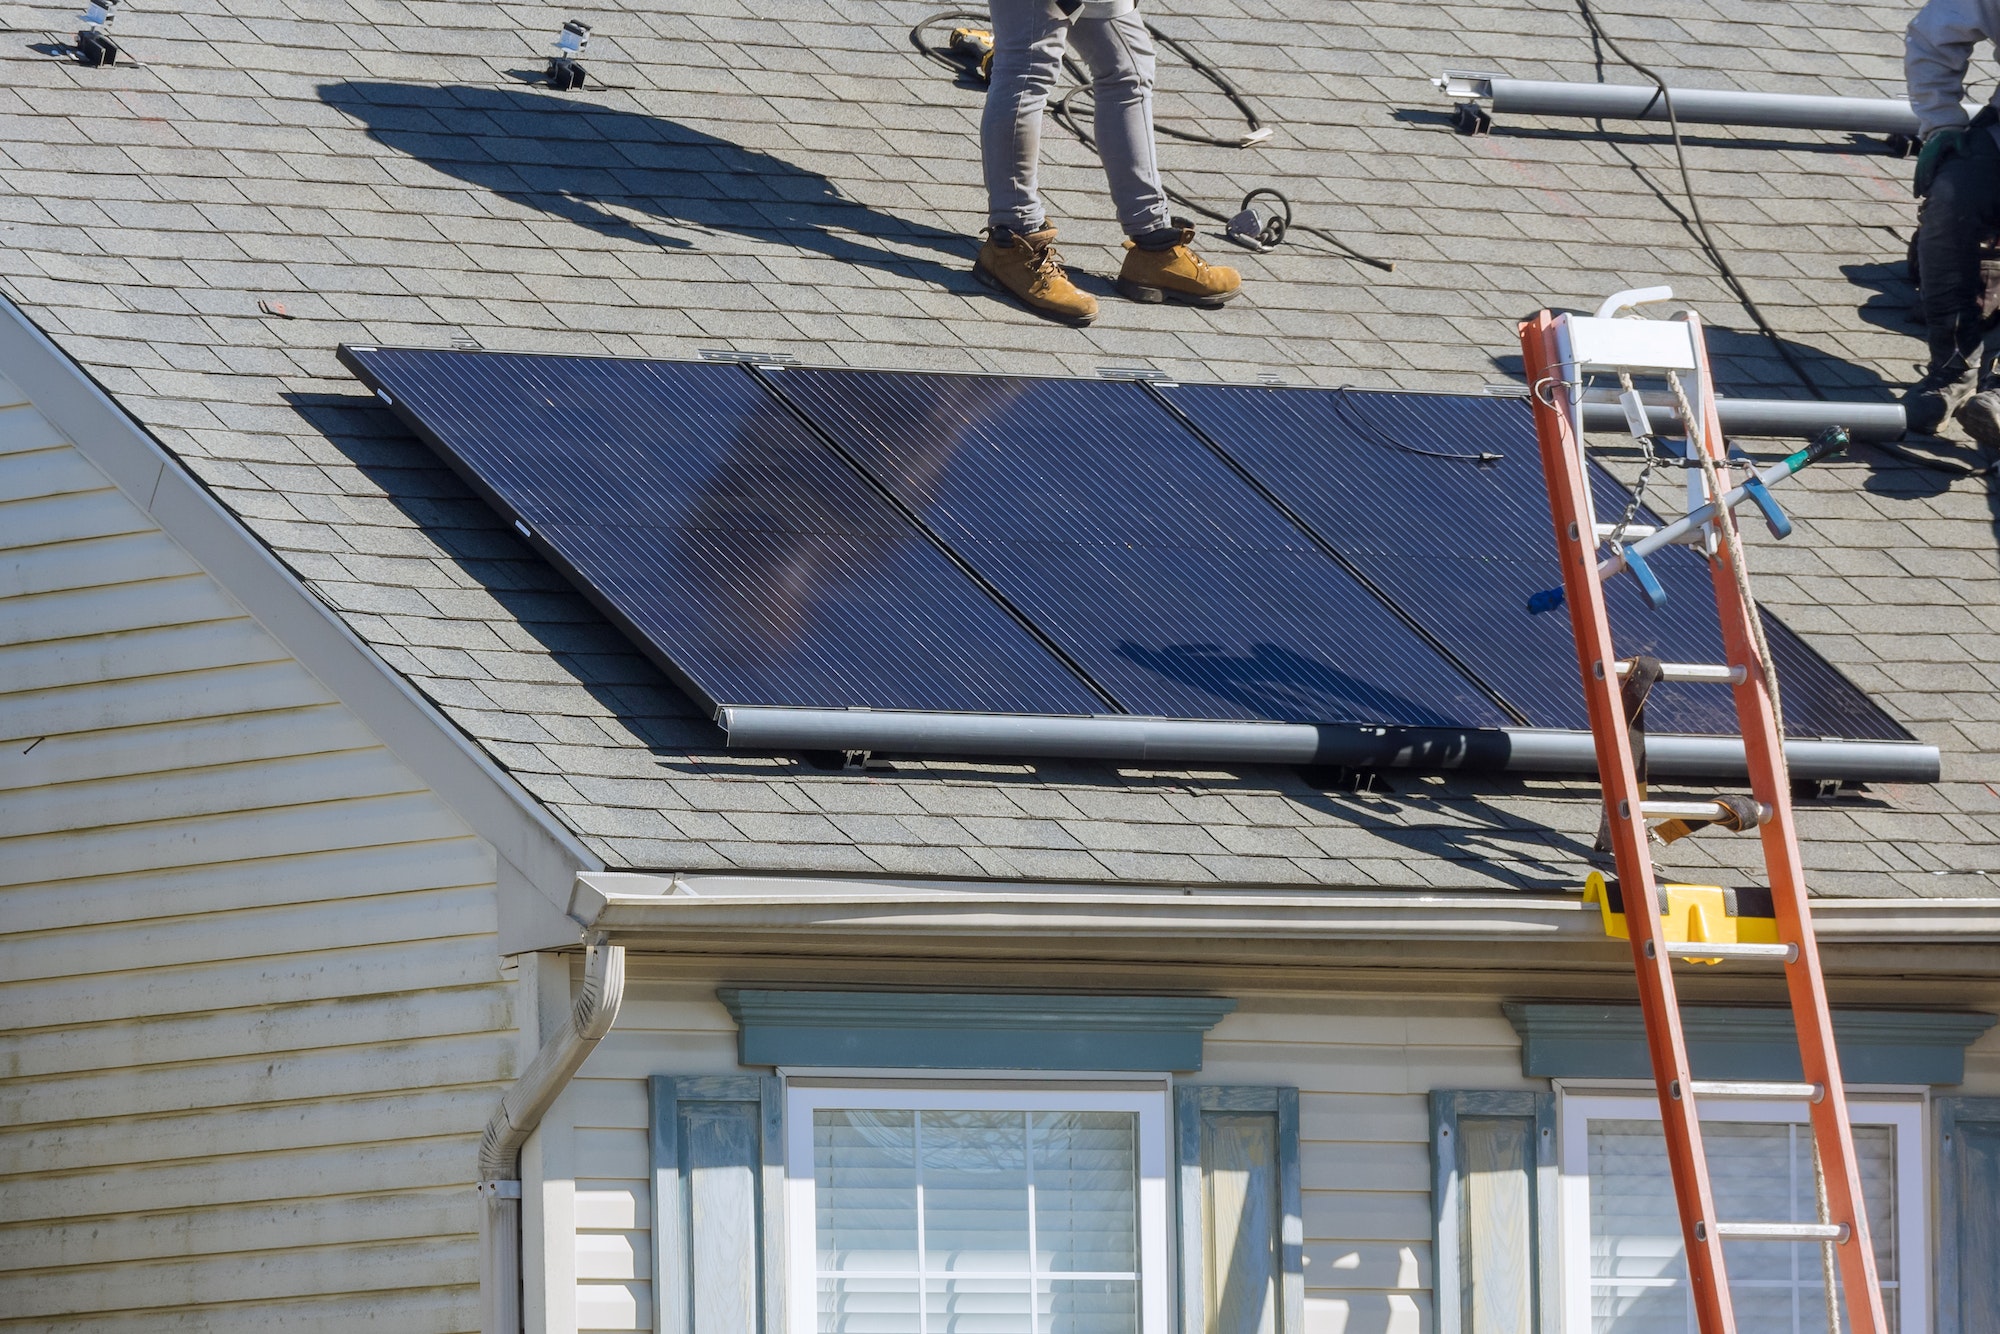 Alternative energy for installed solar panels in use on roof of home